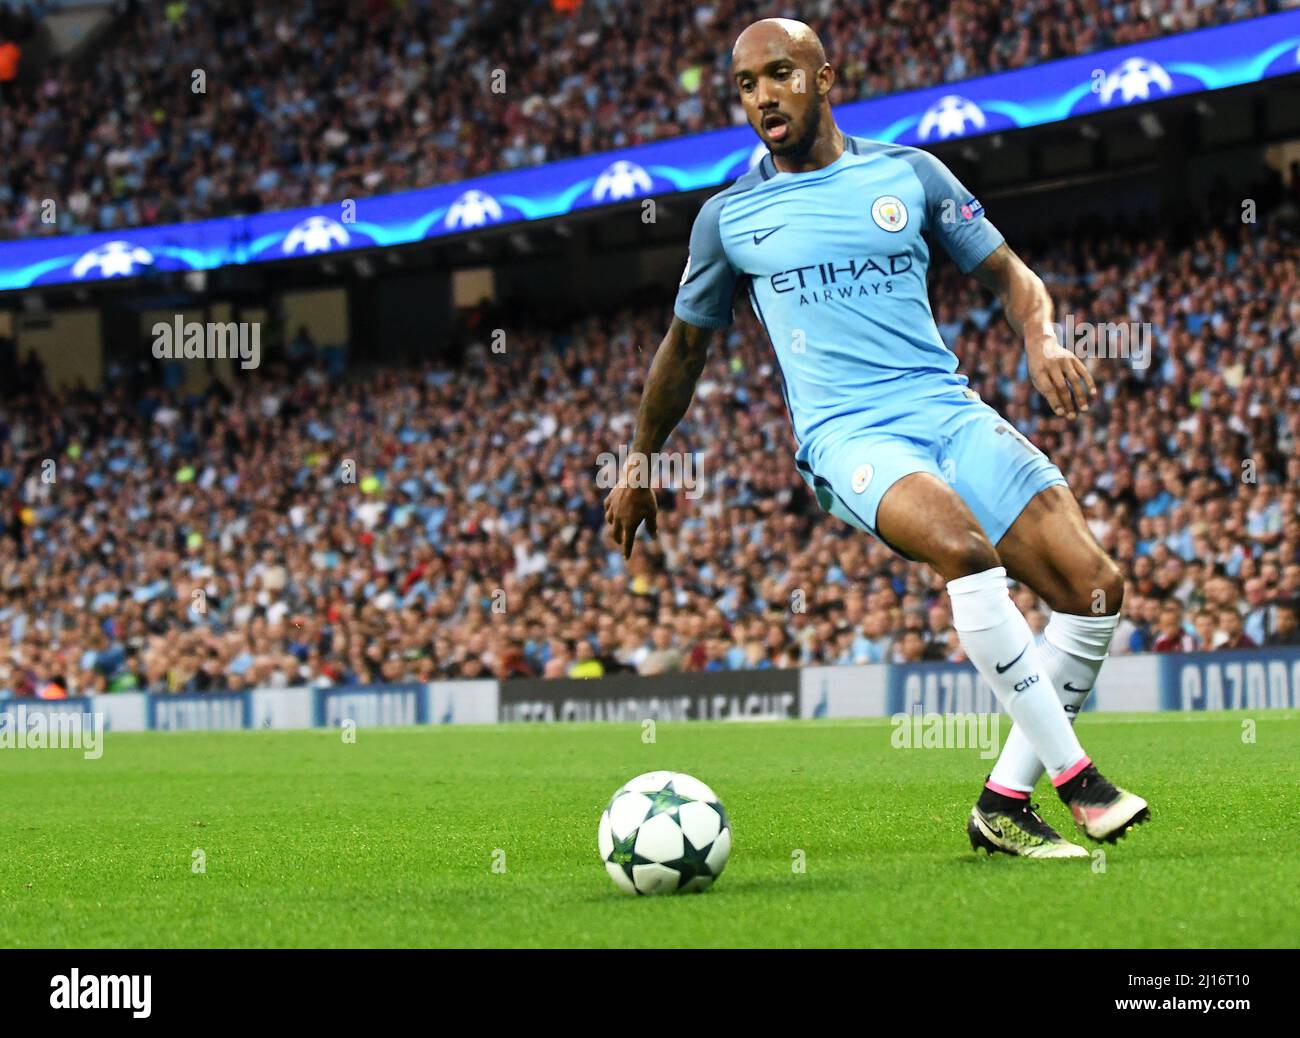 MANCHESTER, ENGLAND - AUGUST 24, 2016: Fabian Delph of City pictured during the second leg of the 2016/17 UEFA Champions League tie between Manchester City (Engalnd) and FCSB (Romania) at Etihad Stadium. Copyright: Cosmin Iftode/Picstaff Stock Photo